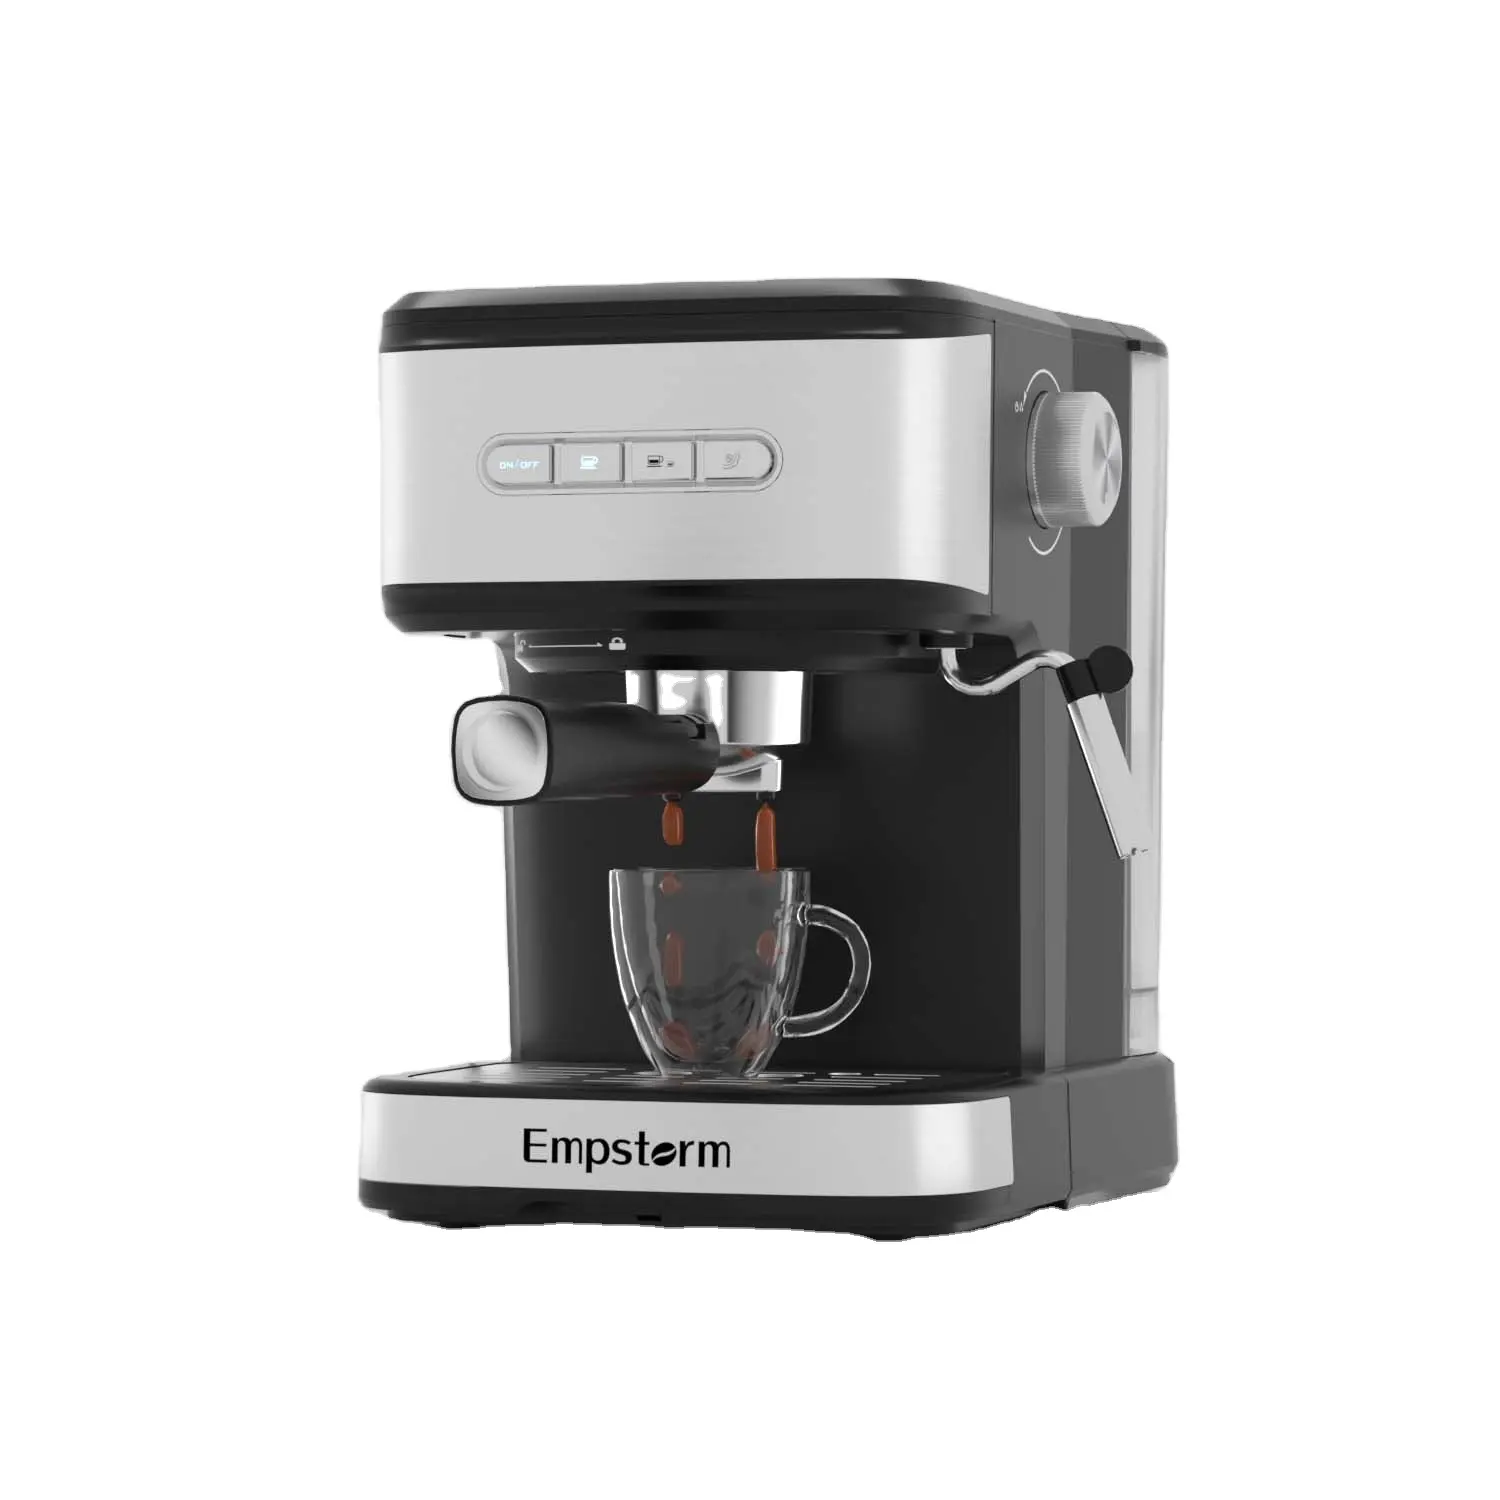 Empstorm 20 Bar Coffee Maker 2 in 1 Espresso Machine with Milk Steam Wand Powder and Capsule Filter Makes Cappuccino Coffee